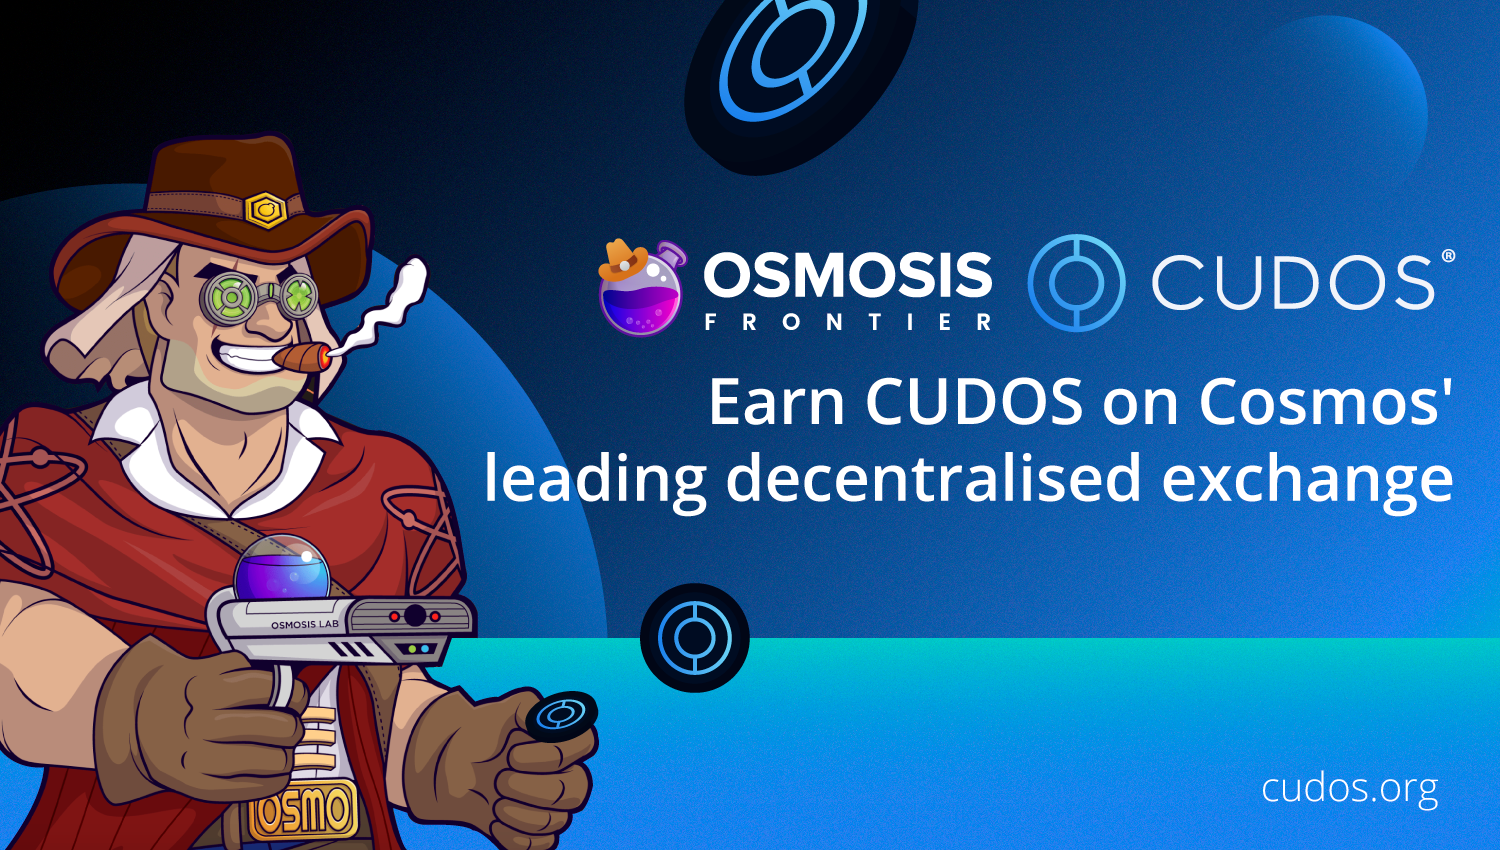 Earn CUDOS on Cosmos’ leading decentralised exchange – Osmosis Frontier